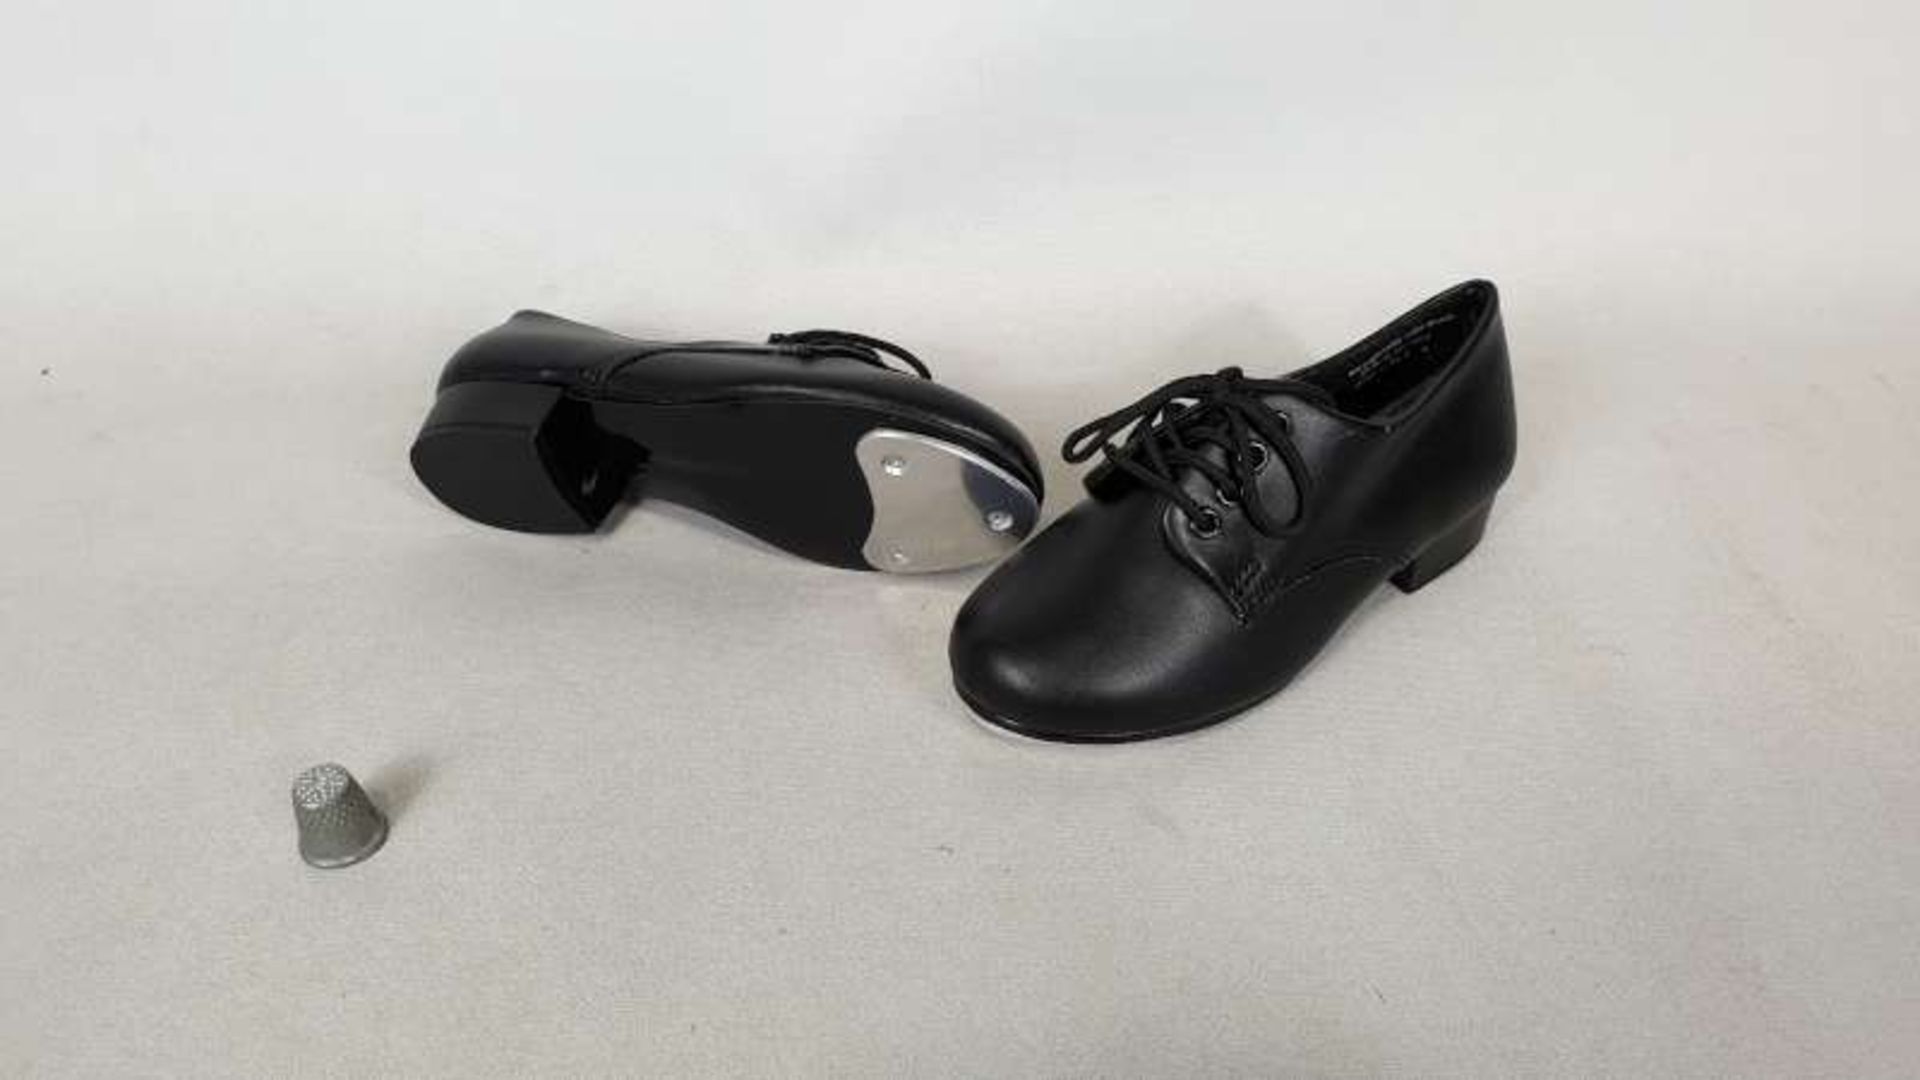 25 X BRAND NEW CHILDRENS BLACK TAP DANCING SHOES IN VARIOUS SIZES IN 1 BOX